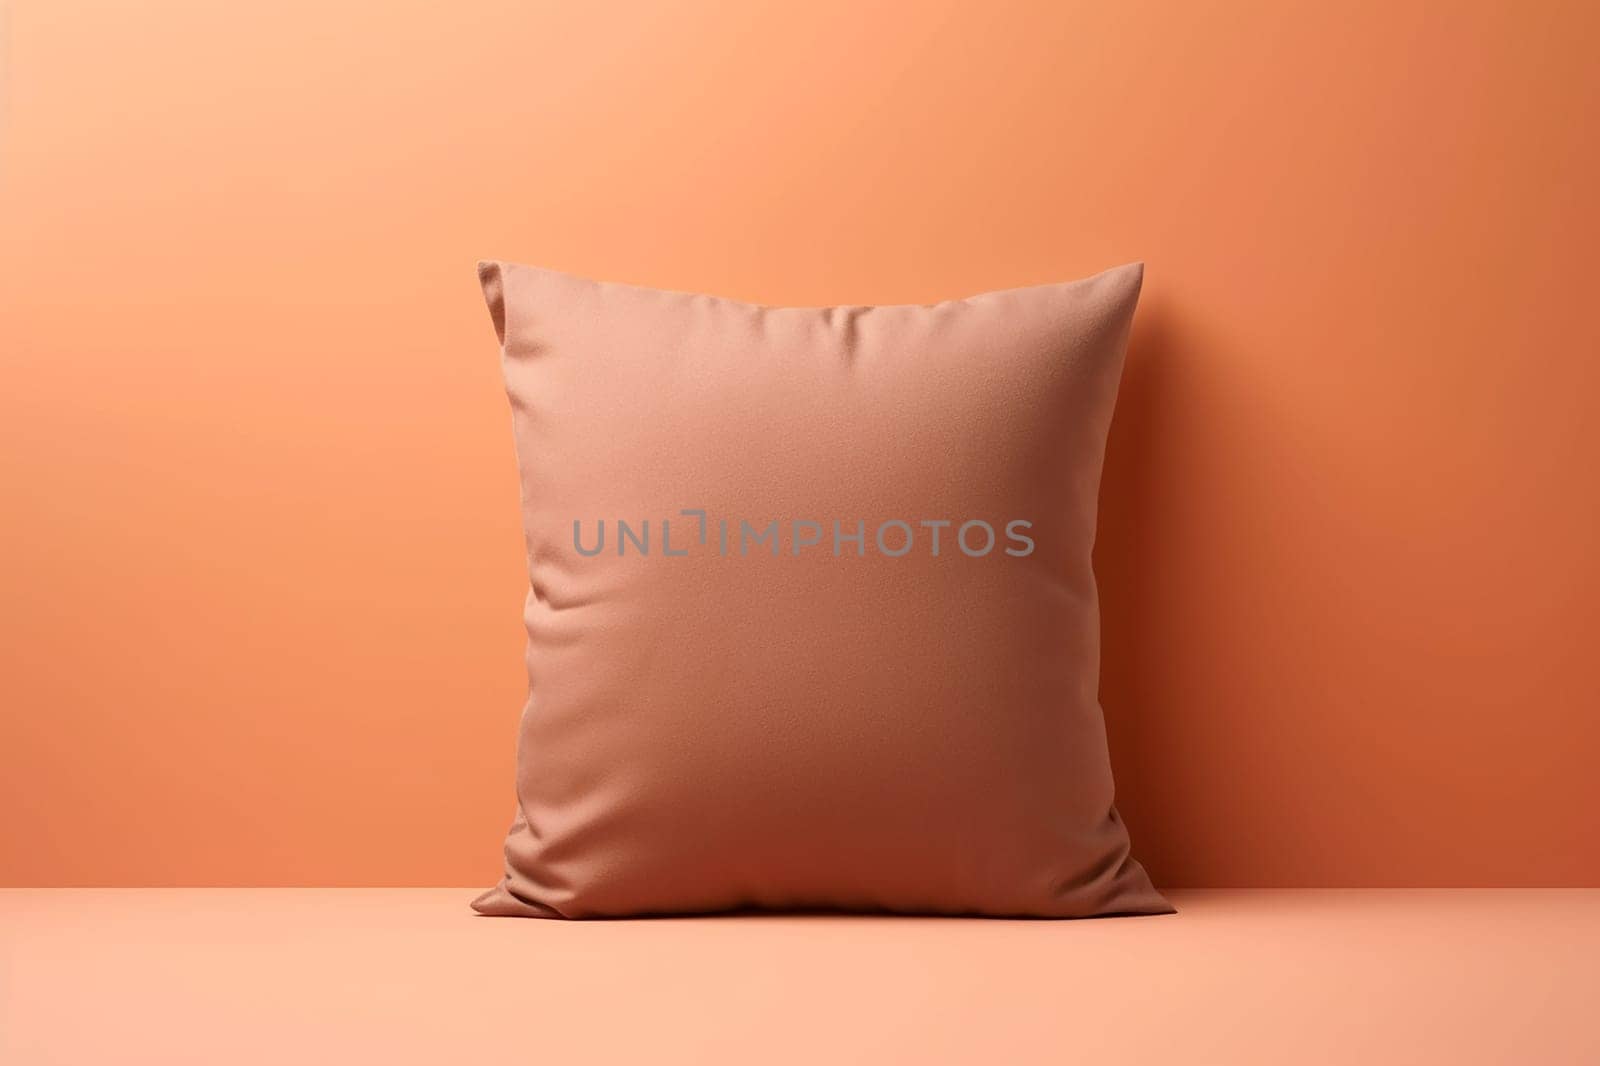 Simple beige pillow on a seamless peach background.